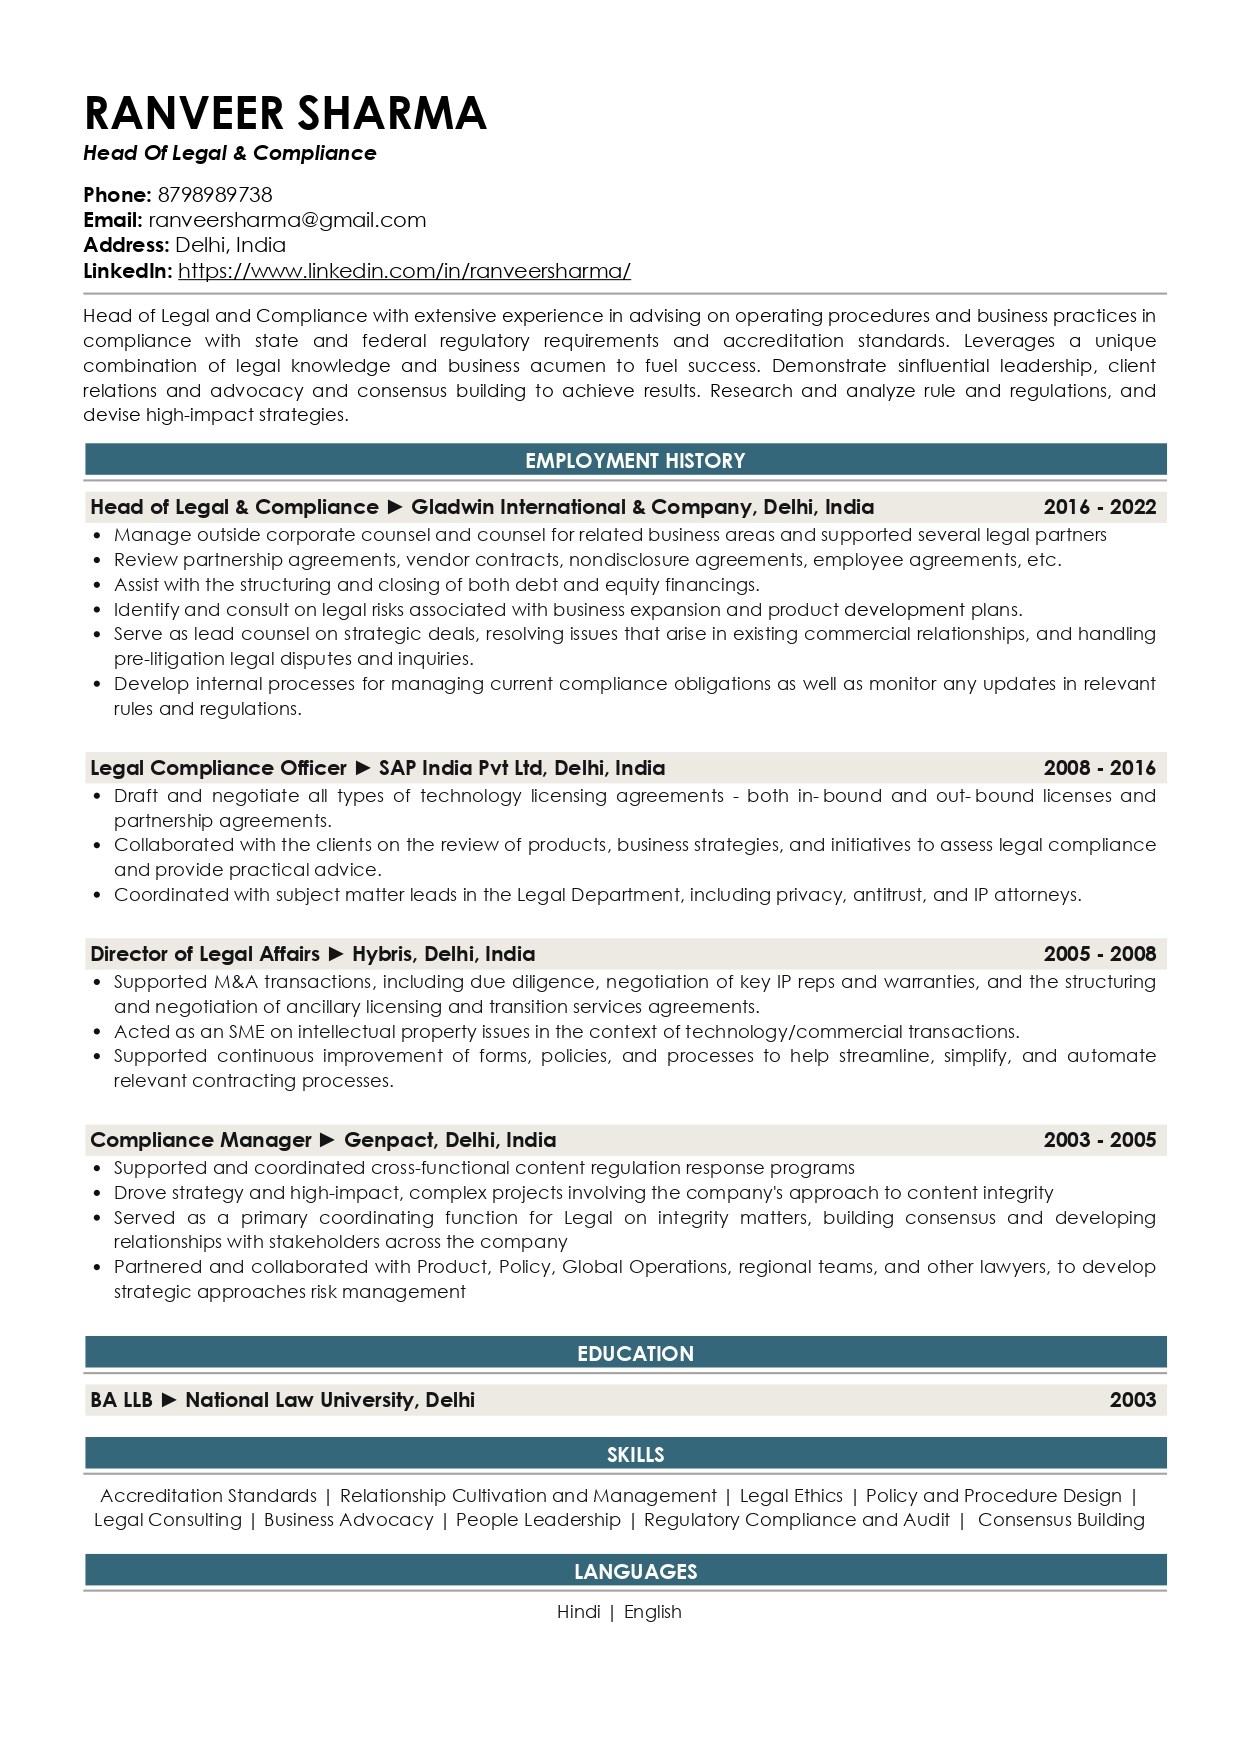 Resume Of Head of Legal Compliance